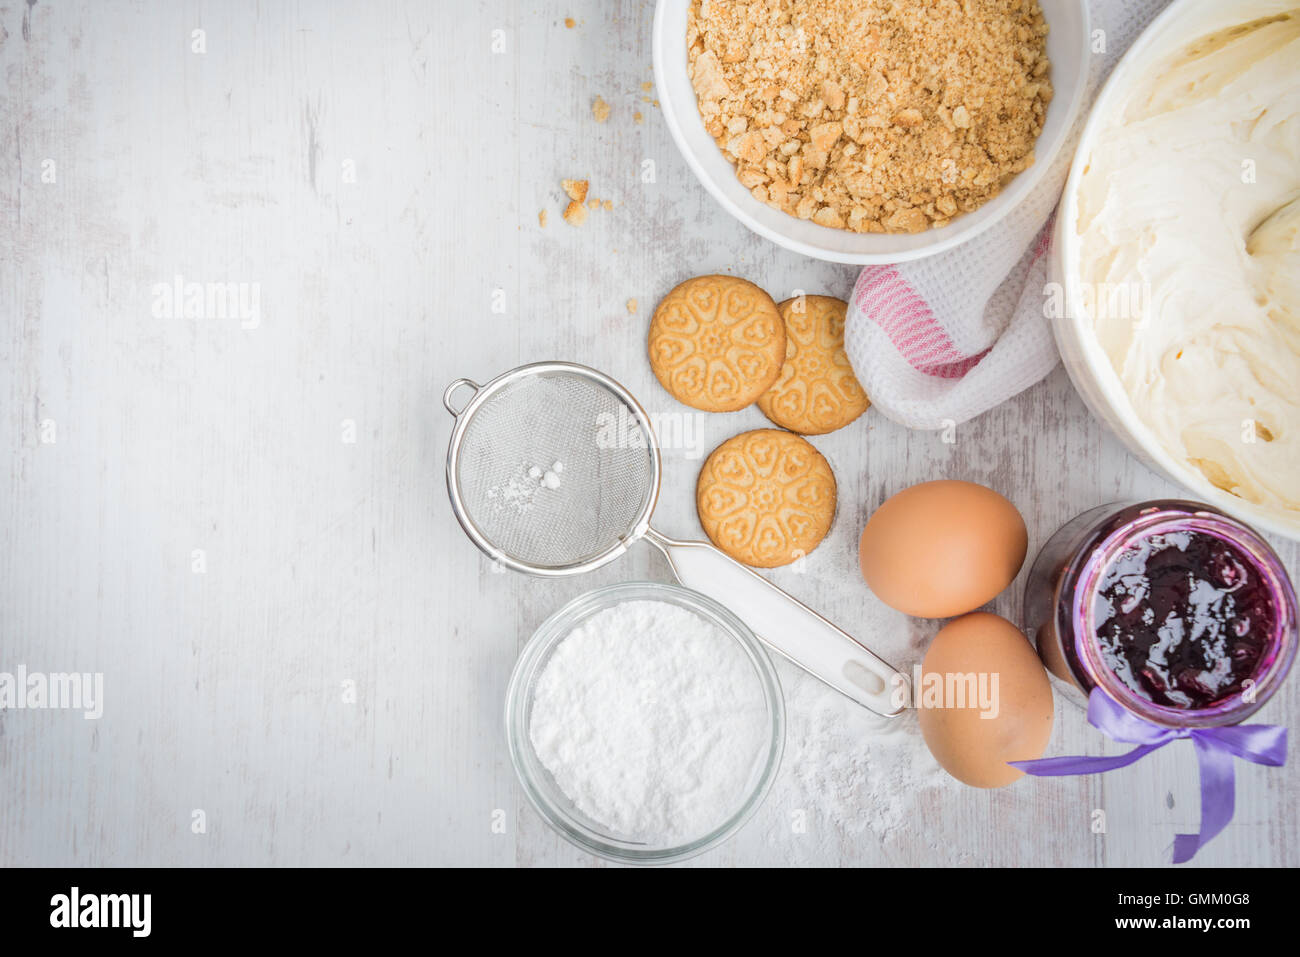 Blueberry cheese cake ingredients prepared over a white wood background. Stock Photo